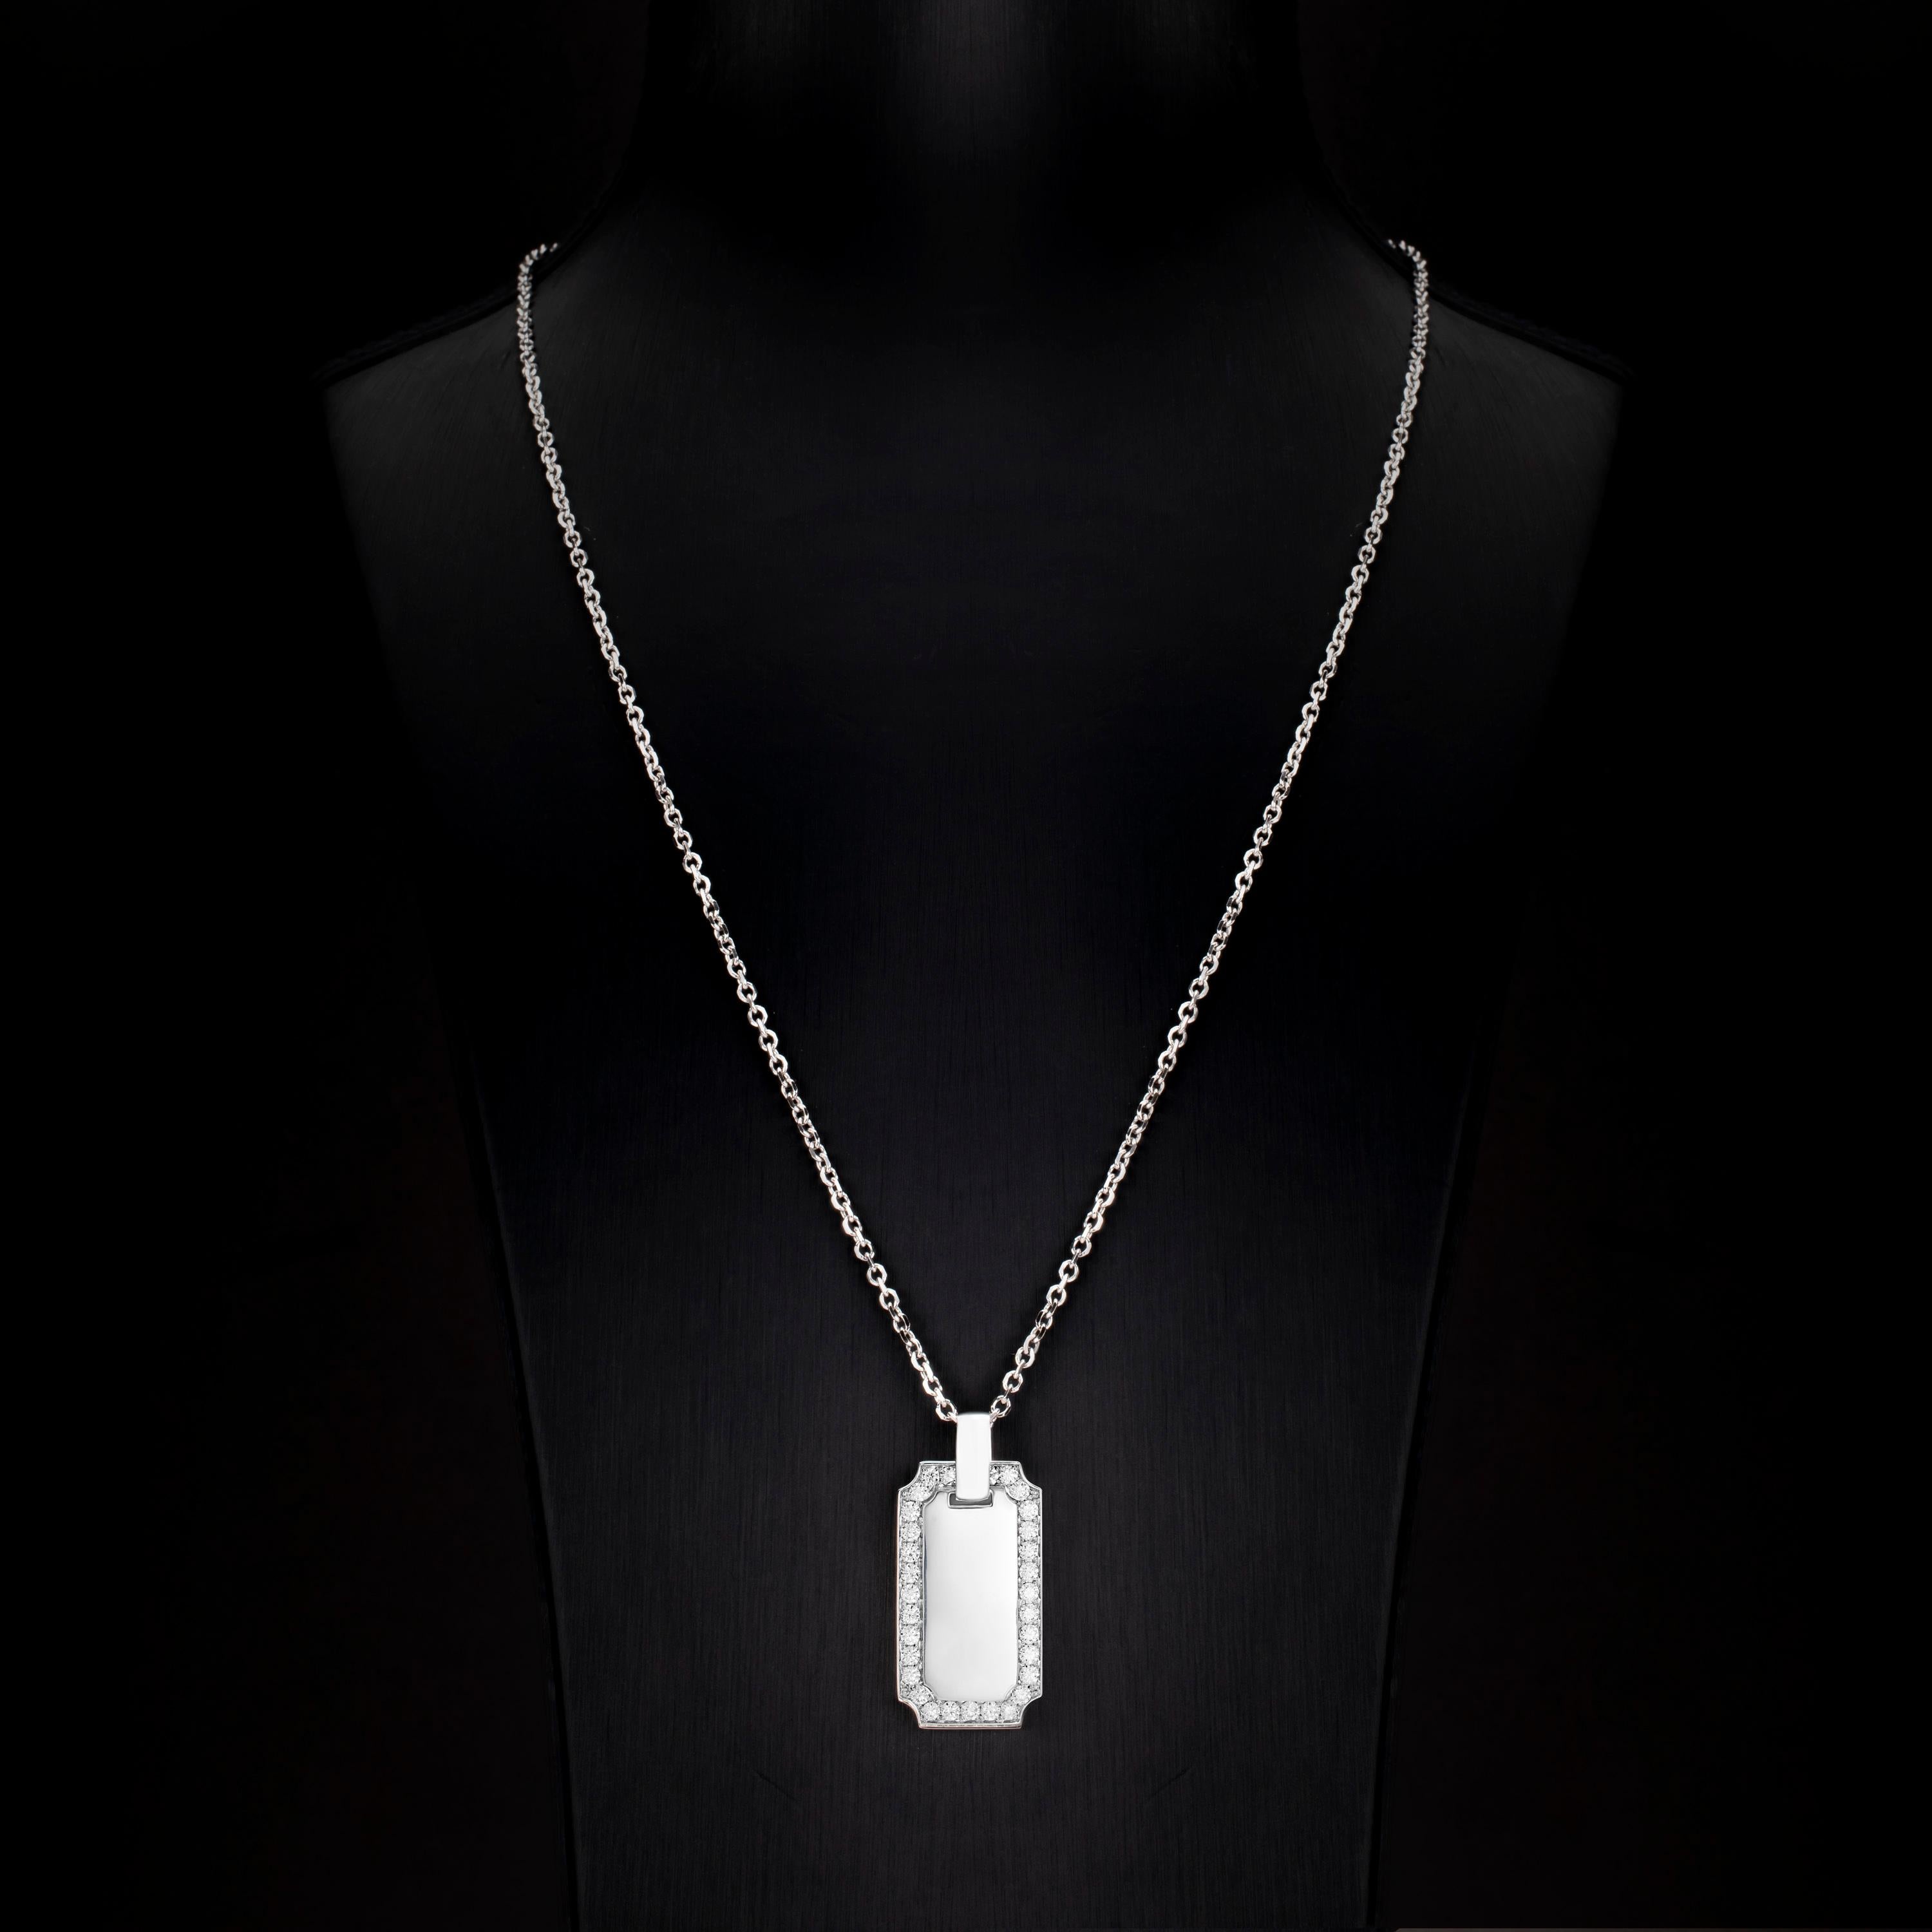 Contemporary 1.34 Carat Diamond 18 Karat Solid White Gold I.D. Tag Pendant Necklace For Sale